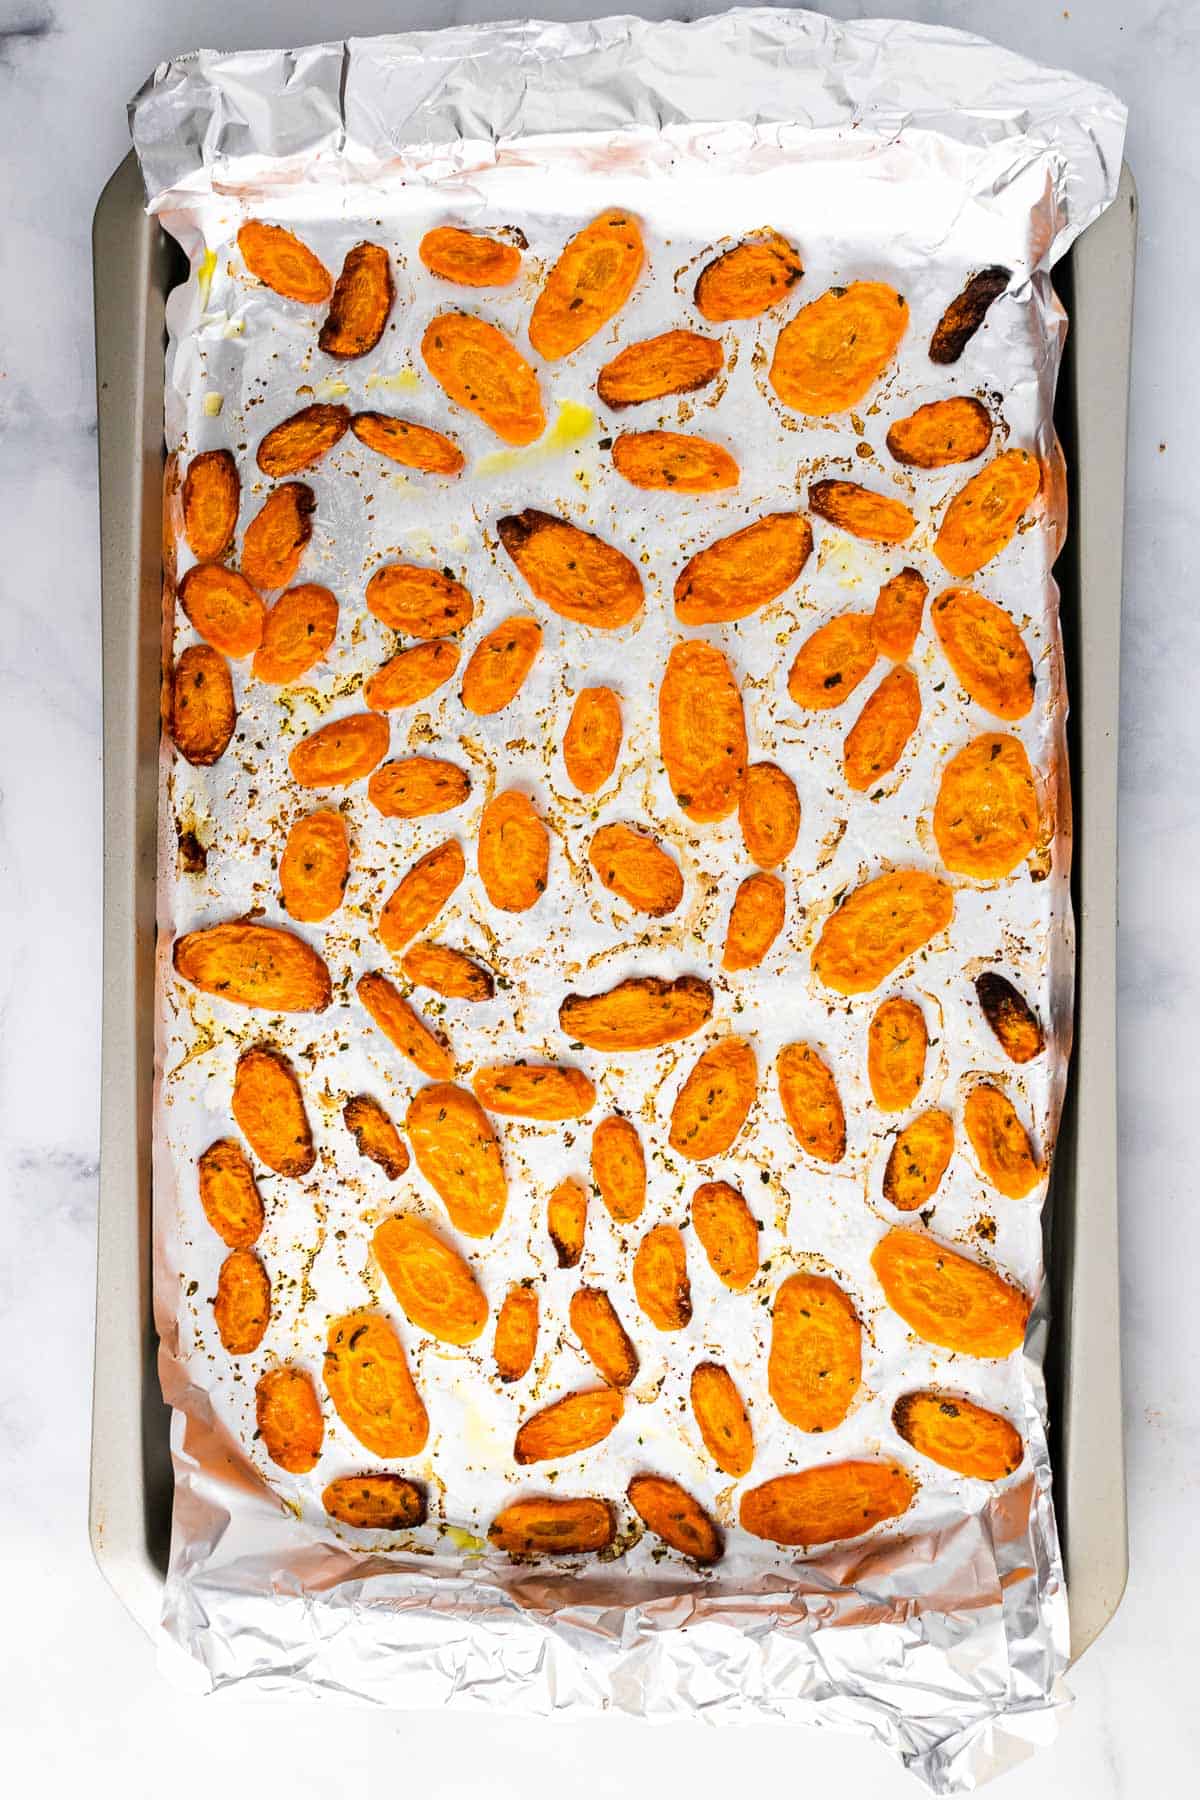 Roasted carrot slices that have finished cooking on a baking sheet covered in foil, as seen from above